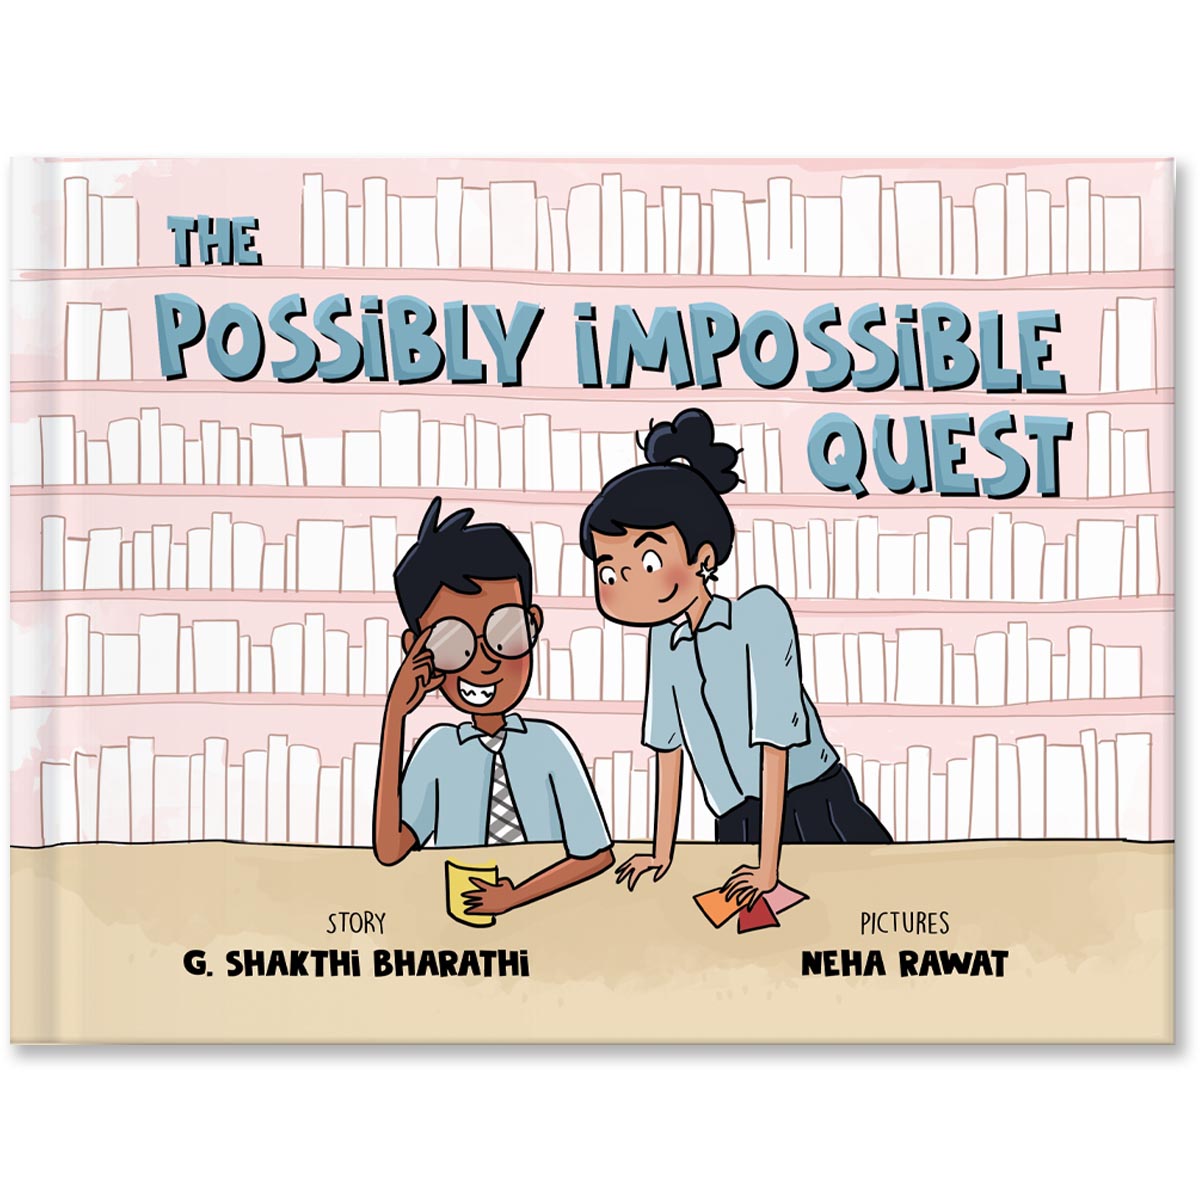 The-Possibly-Impossible-Quest_Ms-Moochie-Books_Neha-Rawat